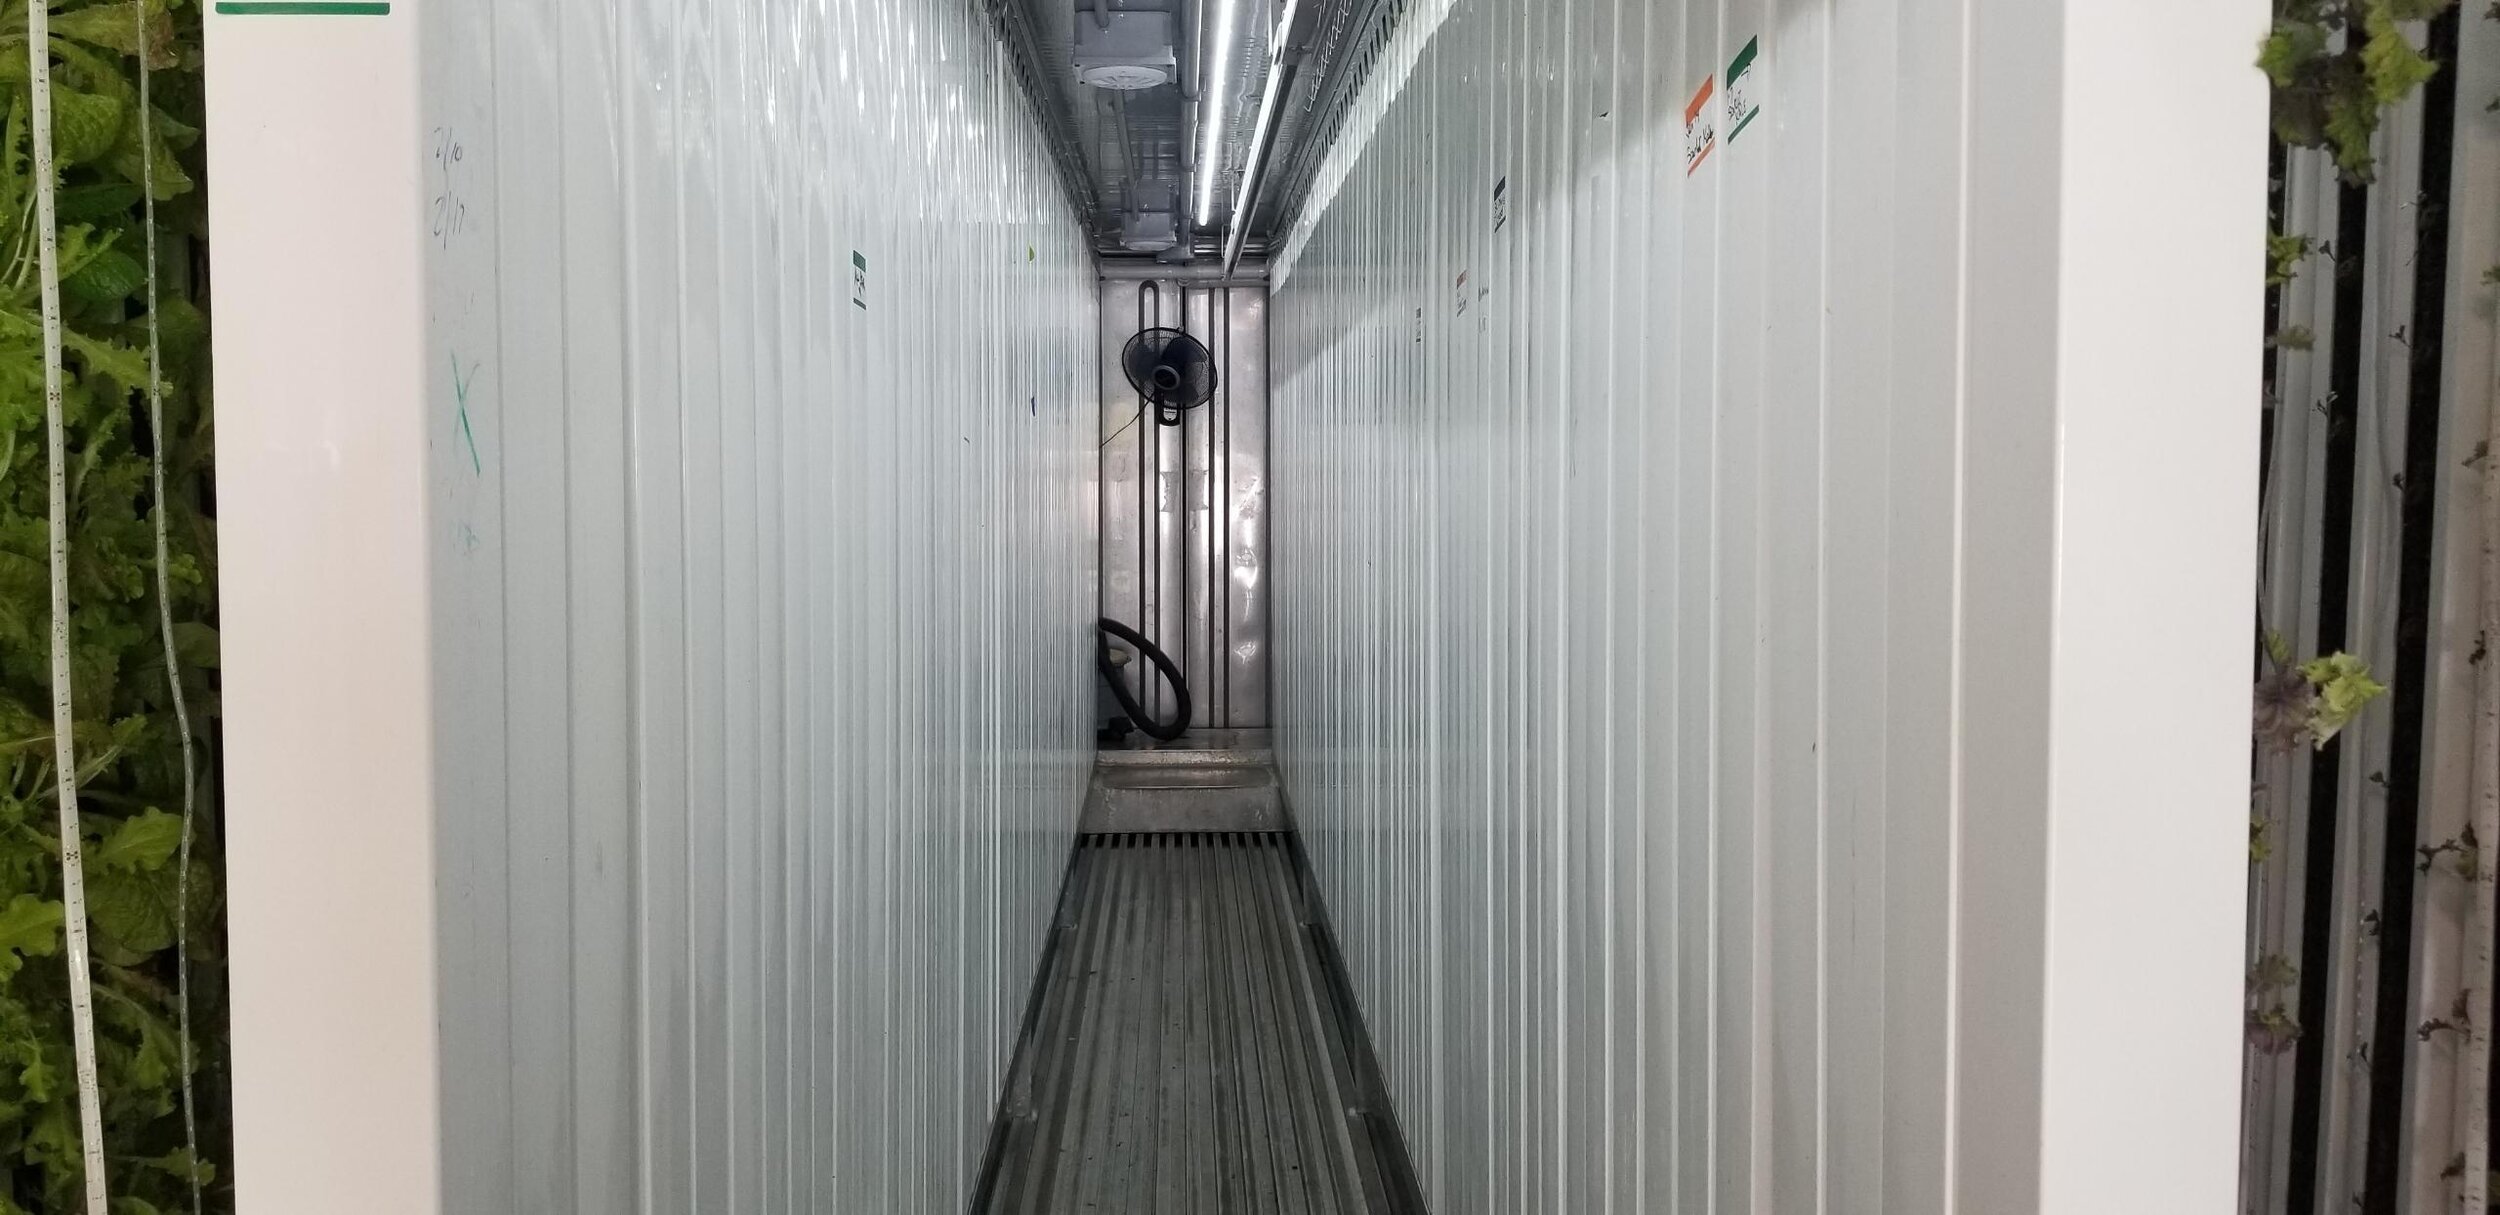 hall1-Hydroponic-Shipping-Container-Farm-Complete-Hydroponic Systems-Freight-Farms-Cost-Commercial-Vertical-Hydroponic-Systems-Pre-Owned-Freight-Farm-Leafy-Green-Machine.JPG